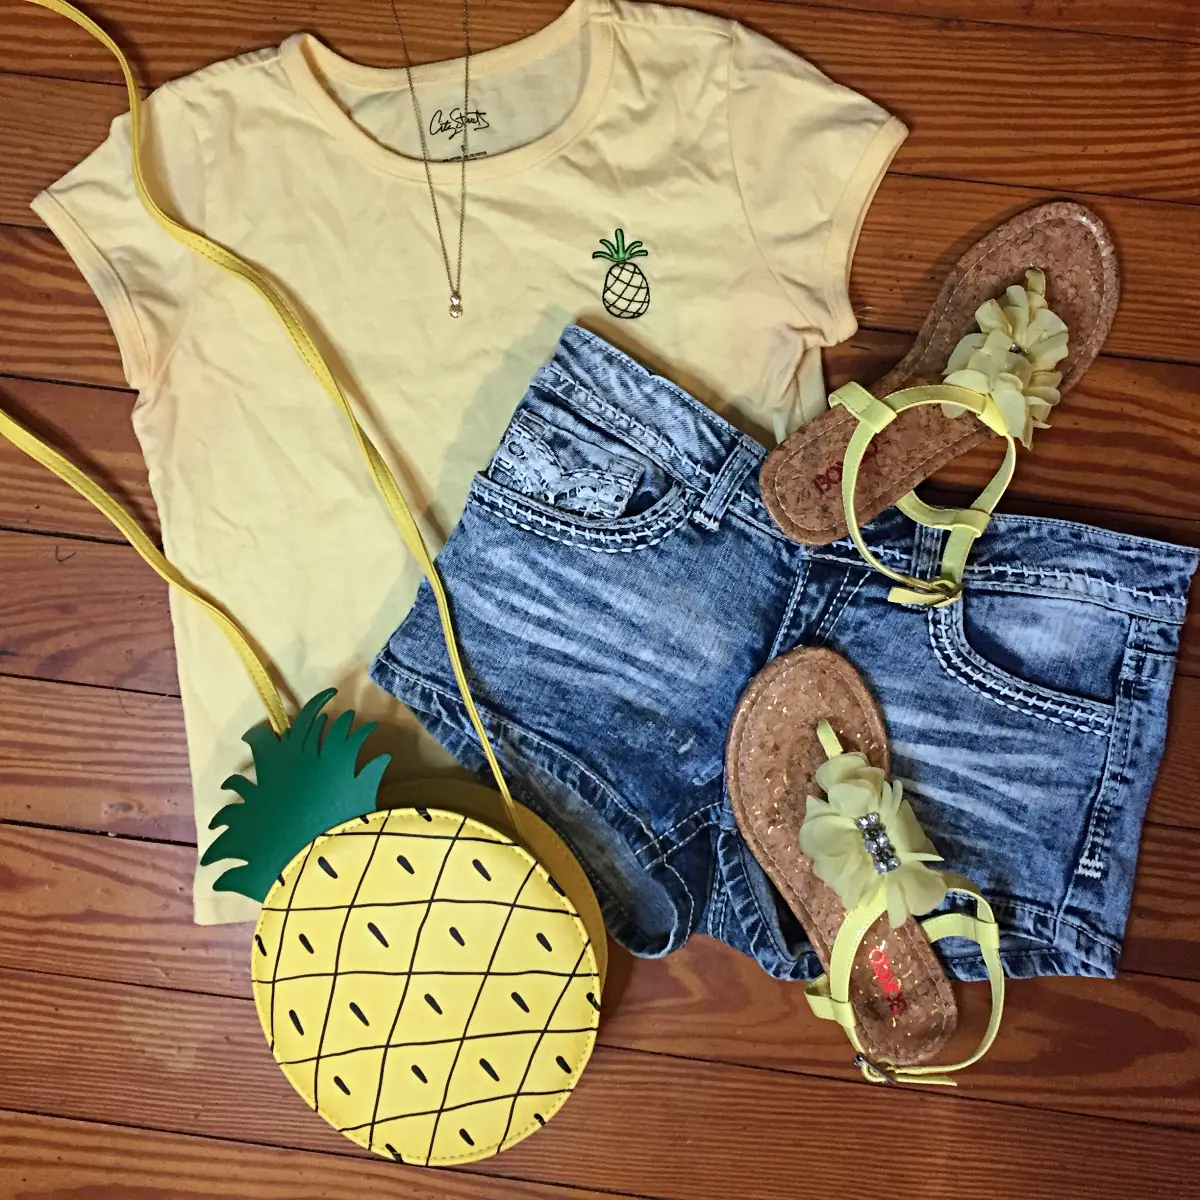 Pineapple Outfits: 9 Women's Looks To Steal As A Fashion Maven